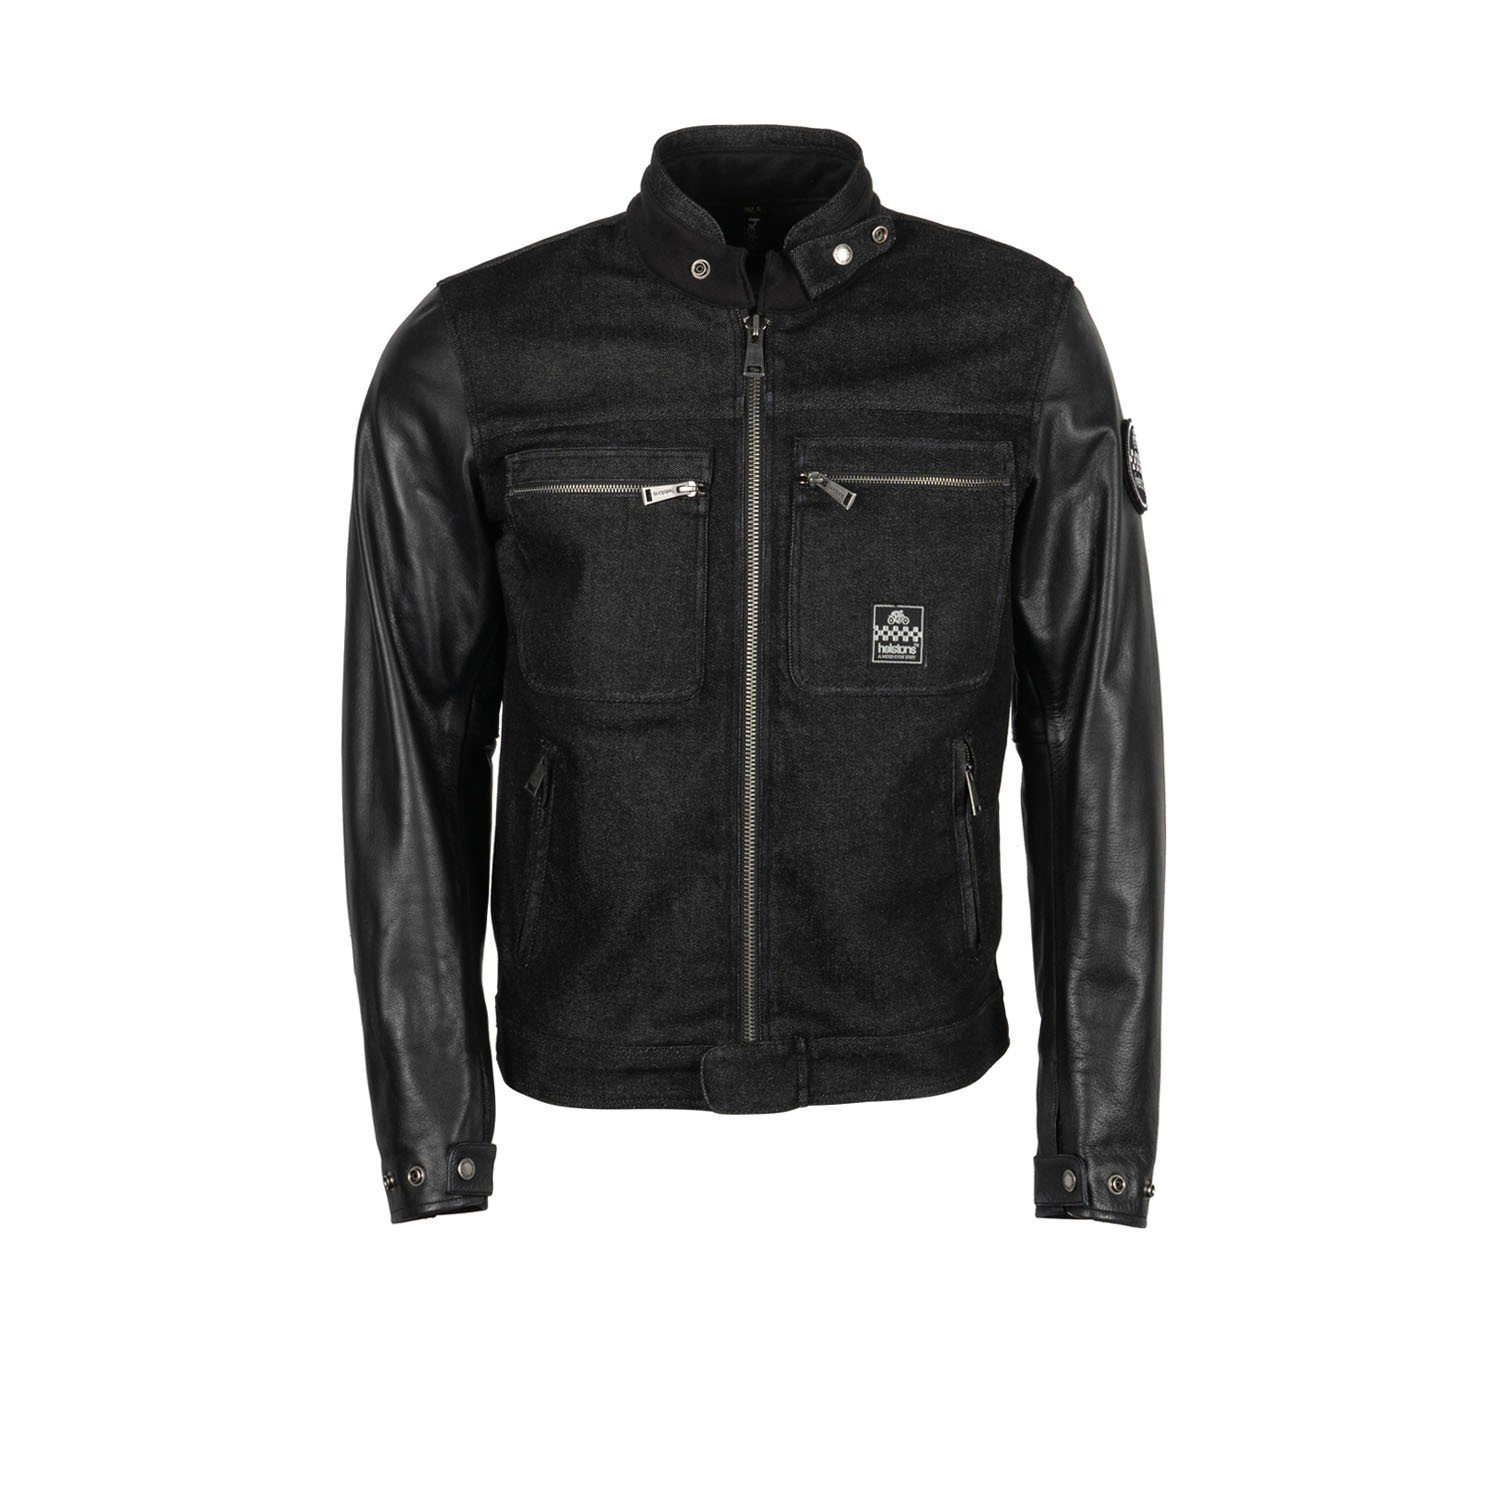 Image of Helstons Winston Canvas Cotton Leather Jacket Black Size S ID 3662136084049